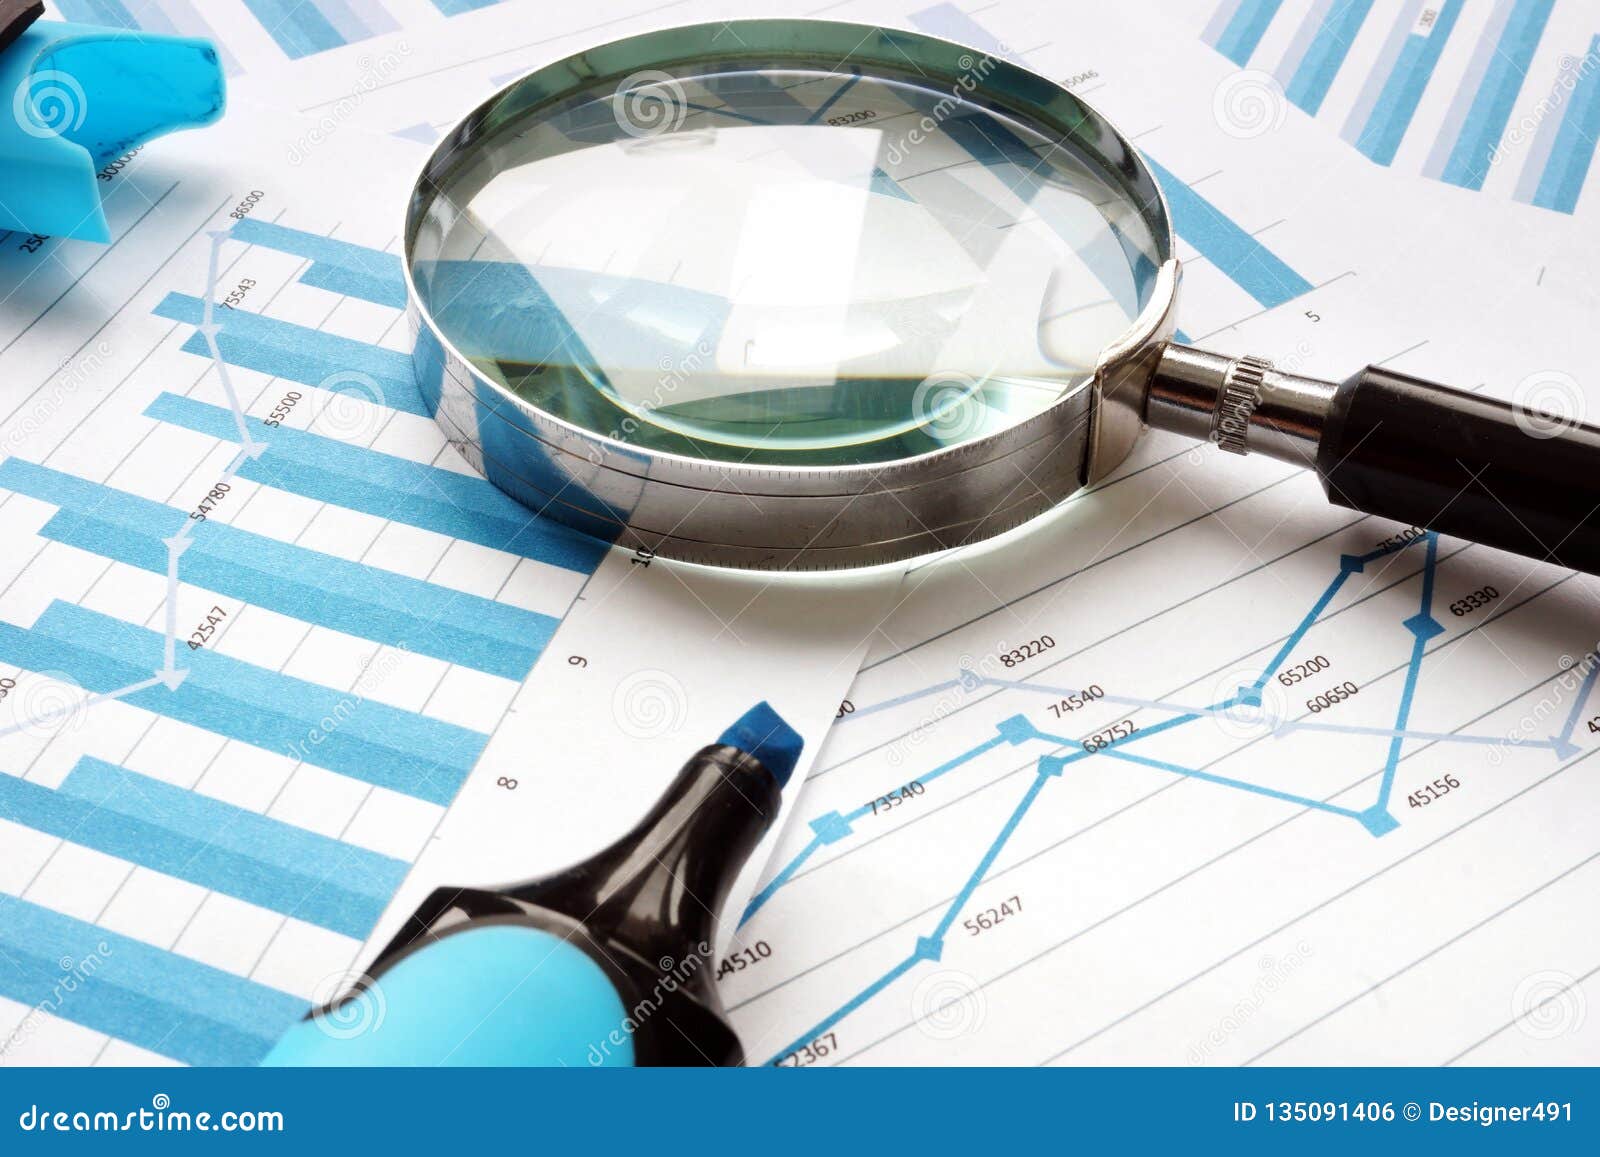 Magnifying glass and financial documents. Audit and accounting